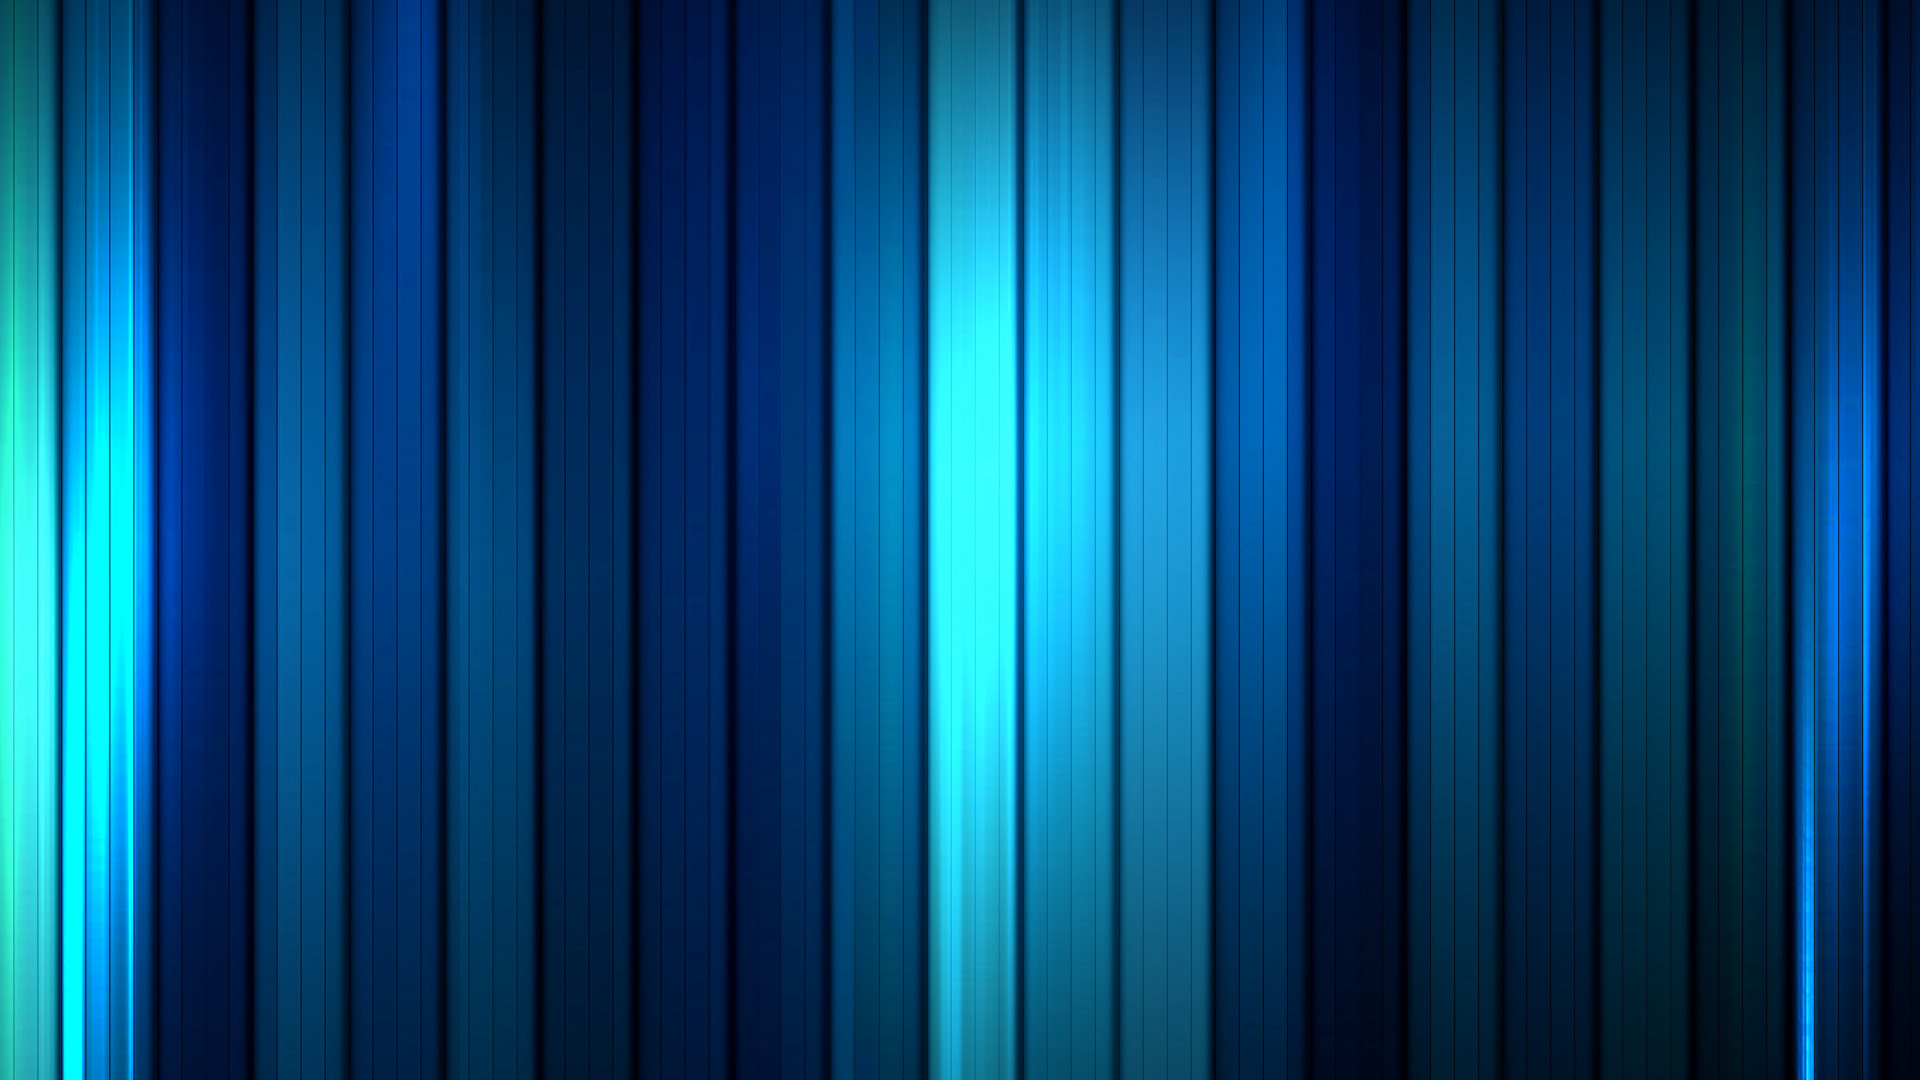 Shades Of Blue Wallpaper High Definition Quality Widescreen